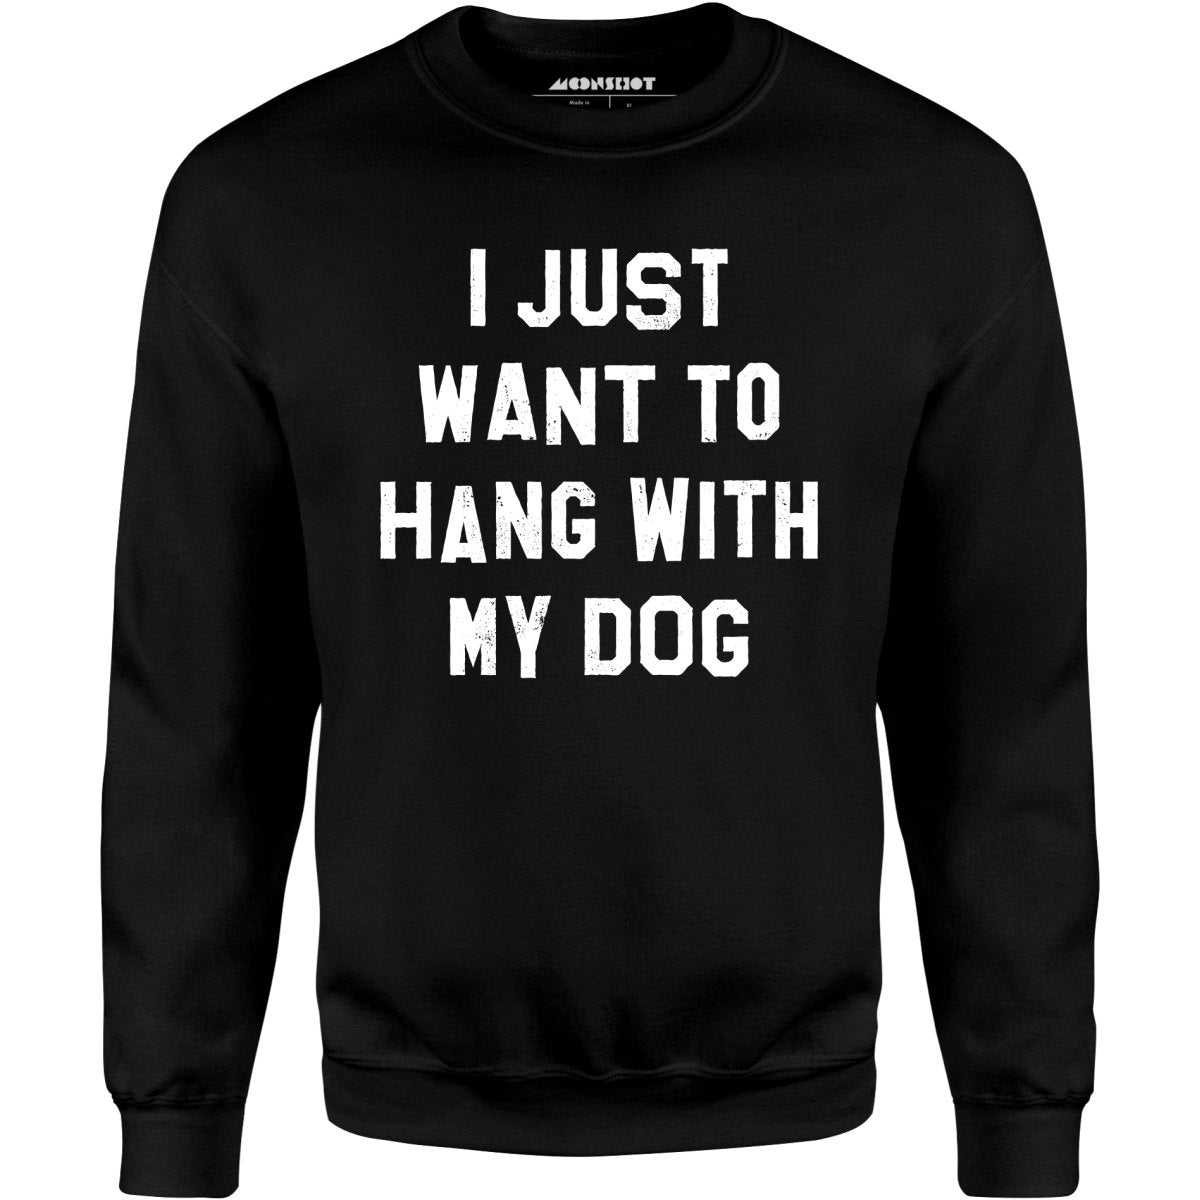 I Just Want to Hang With My Dog - Unisex Sweatshirt